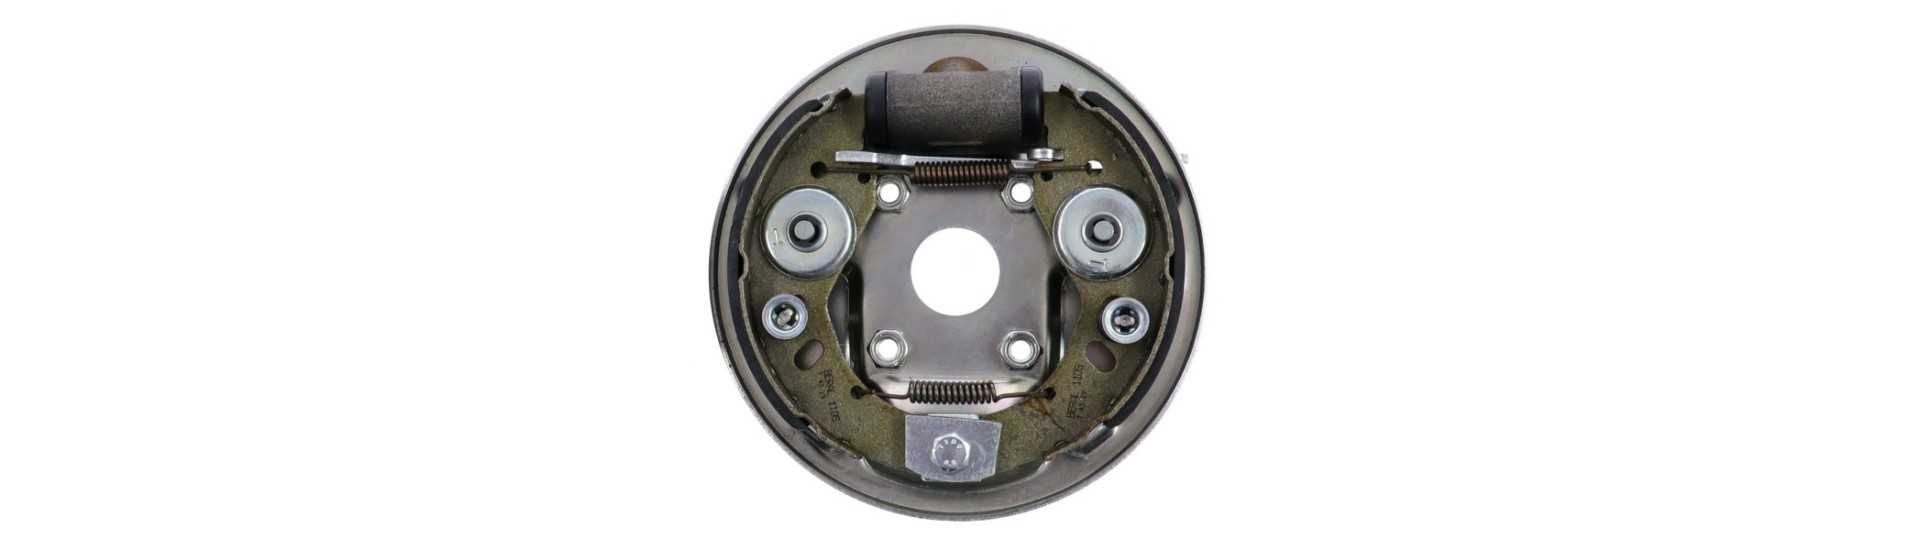 Rear front brake kit at best price for car without permit